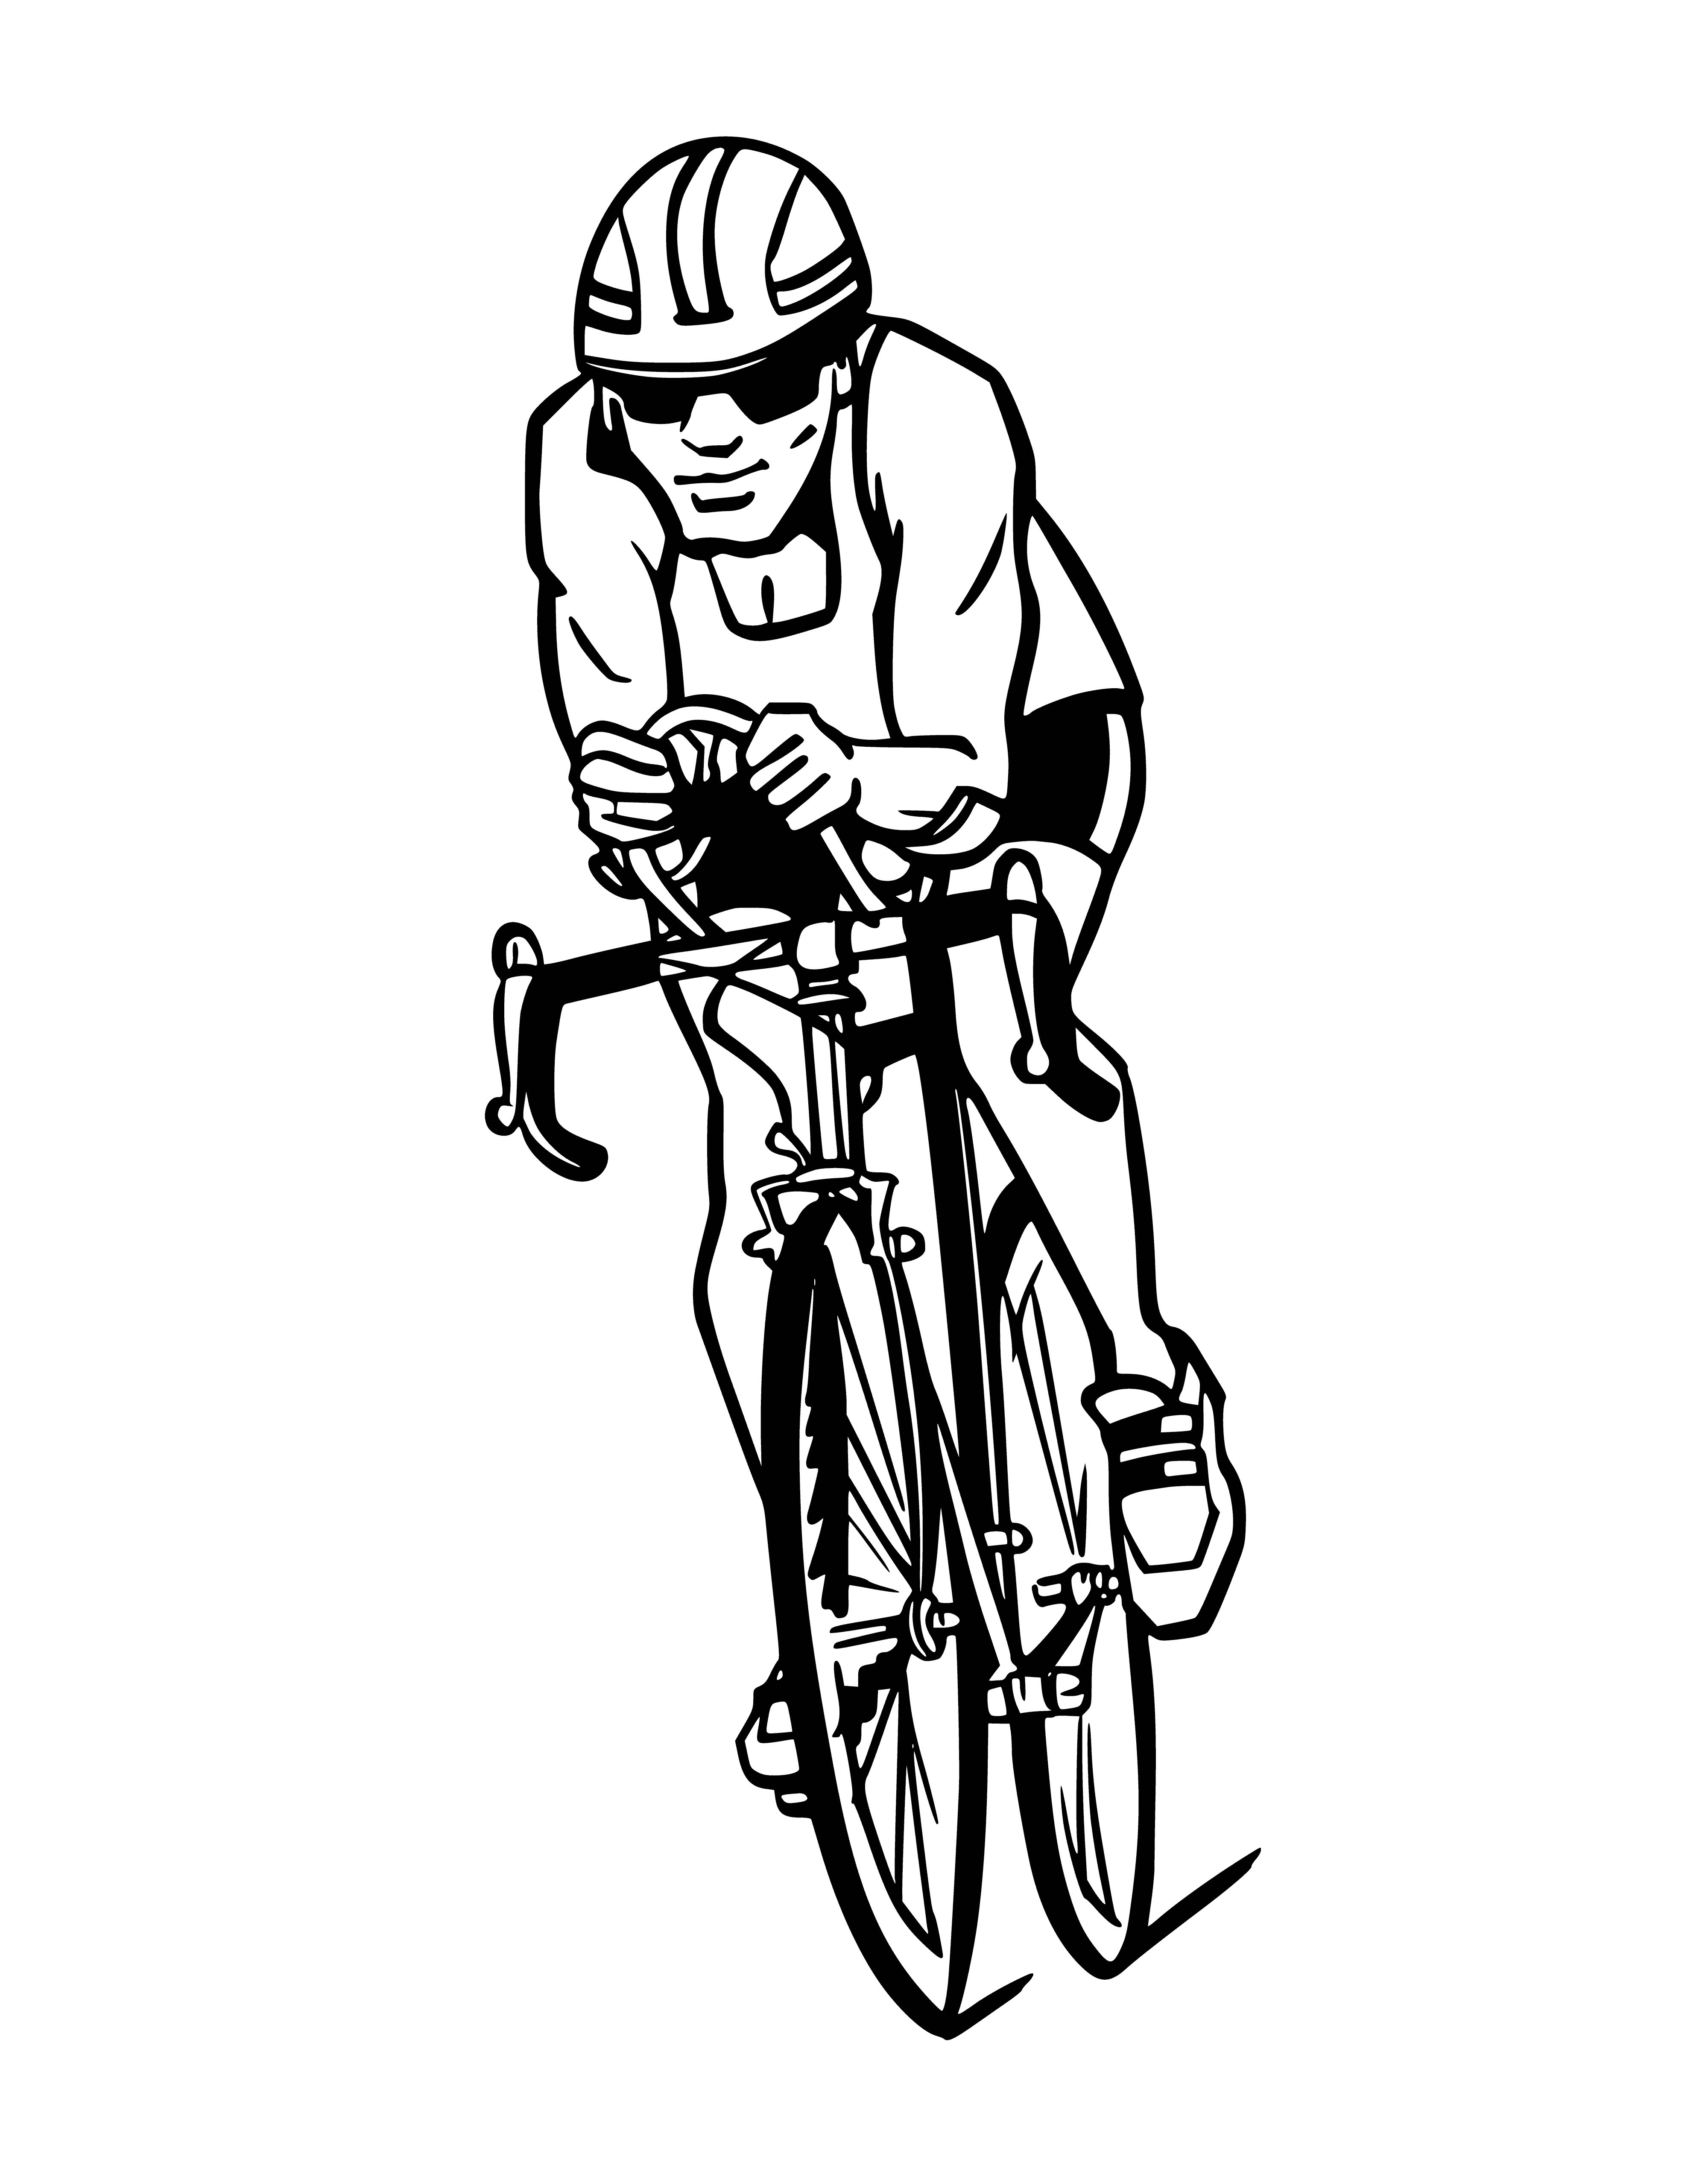 Cyclist coloring page